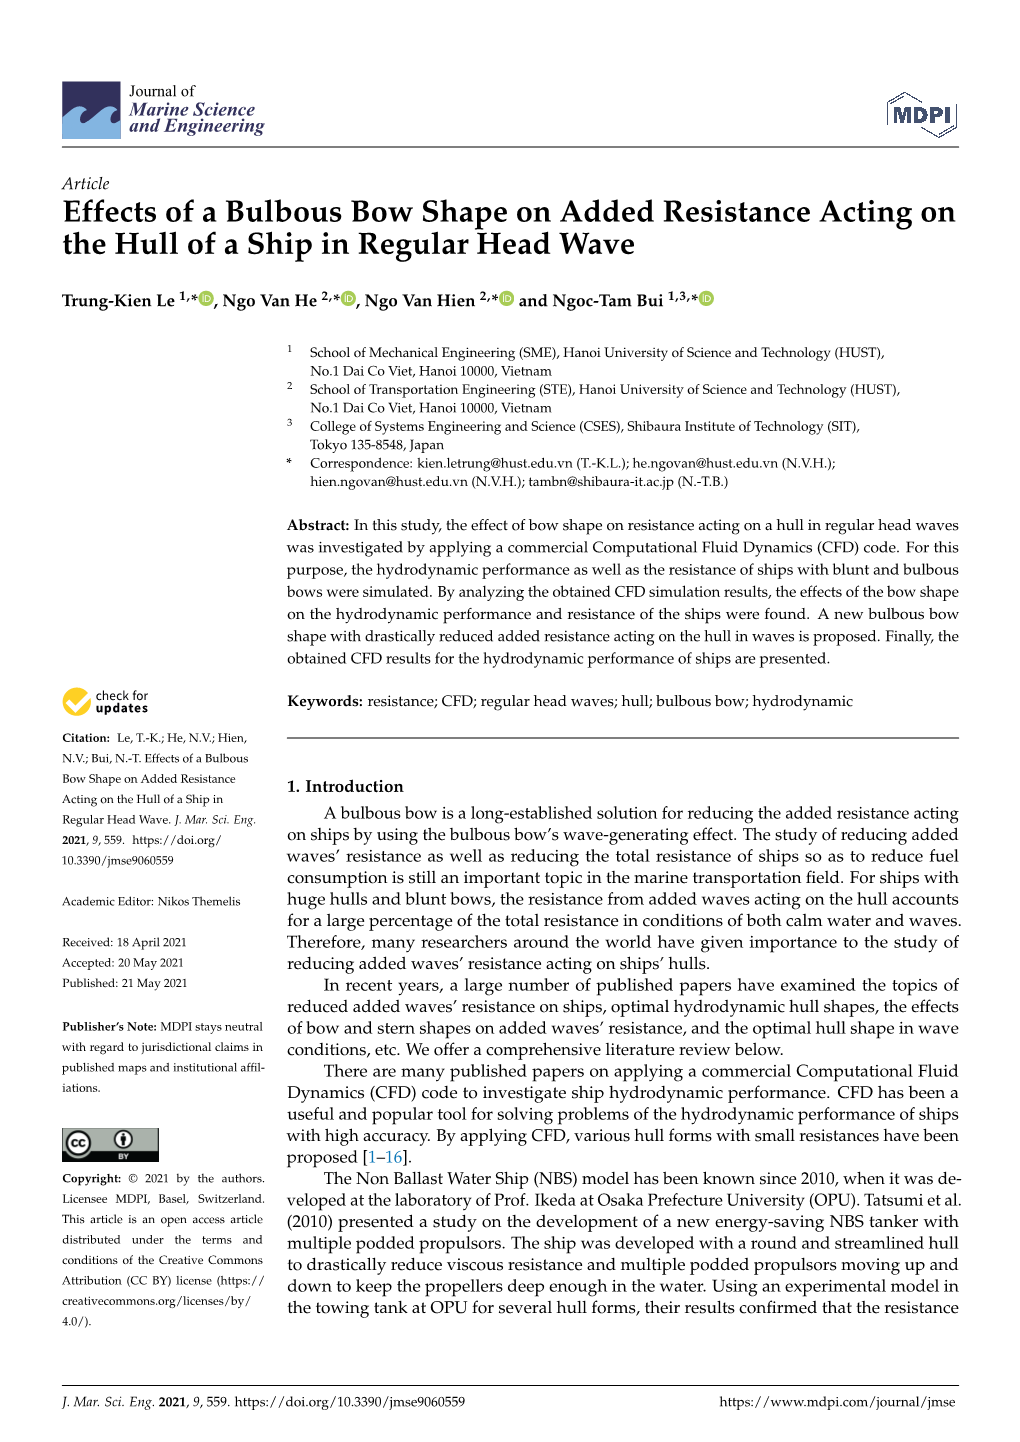 Effects of a Bulbous Bow Shape on Added Resistance Acting on the Hull of a Ship in Regular Head Wave